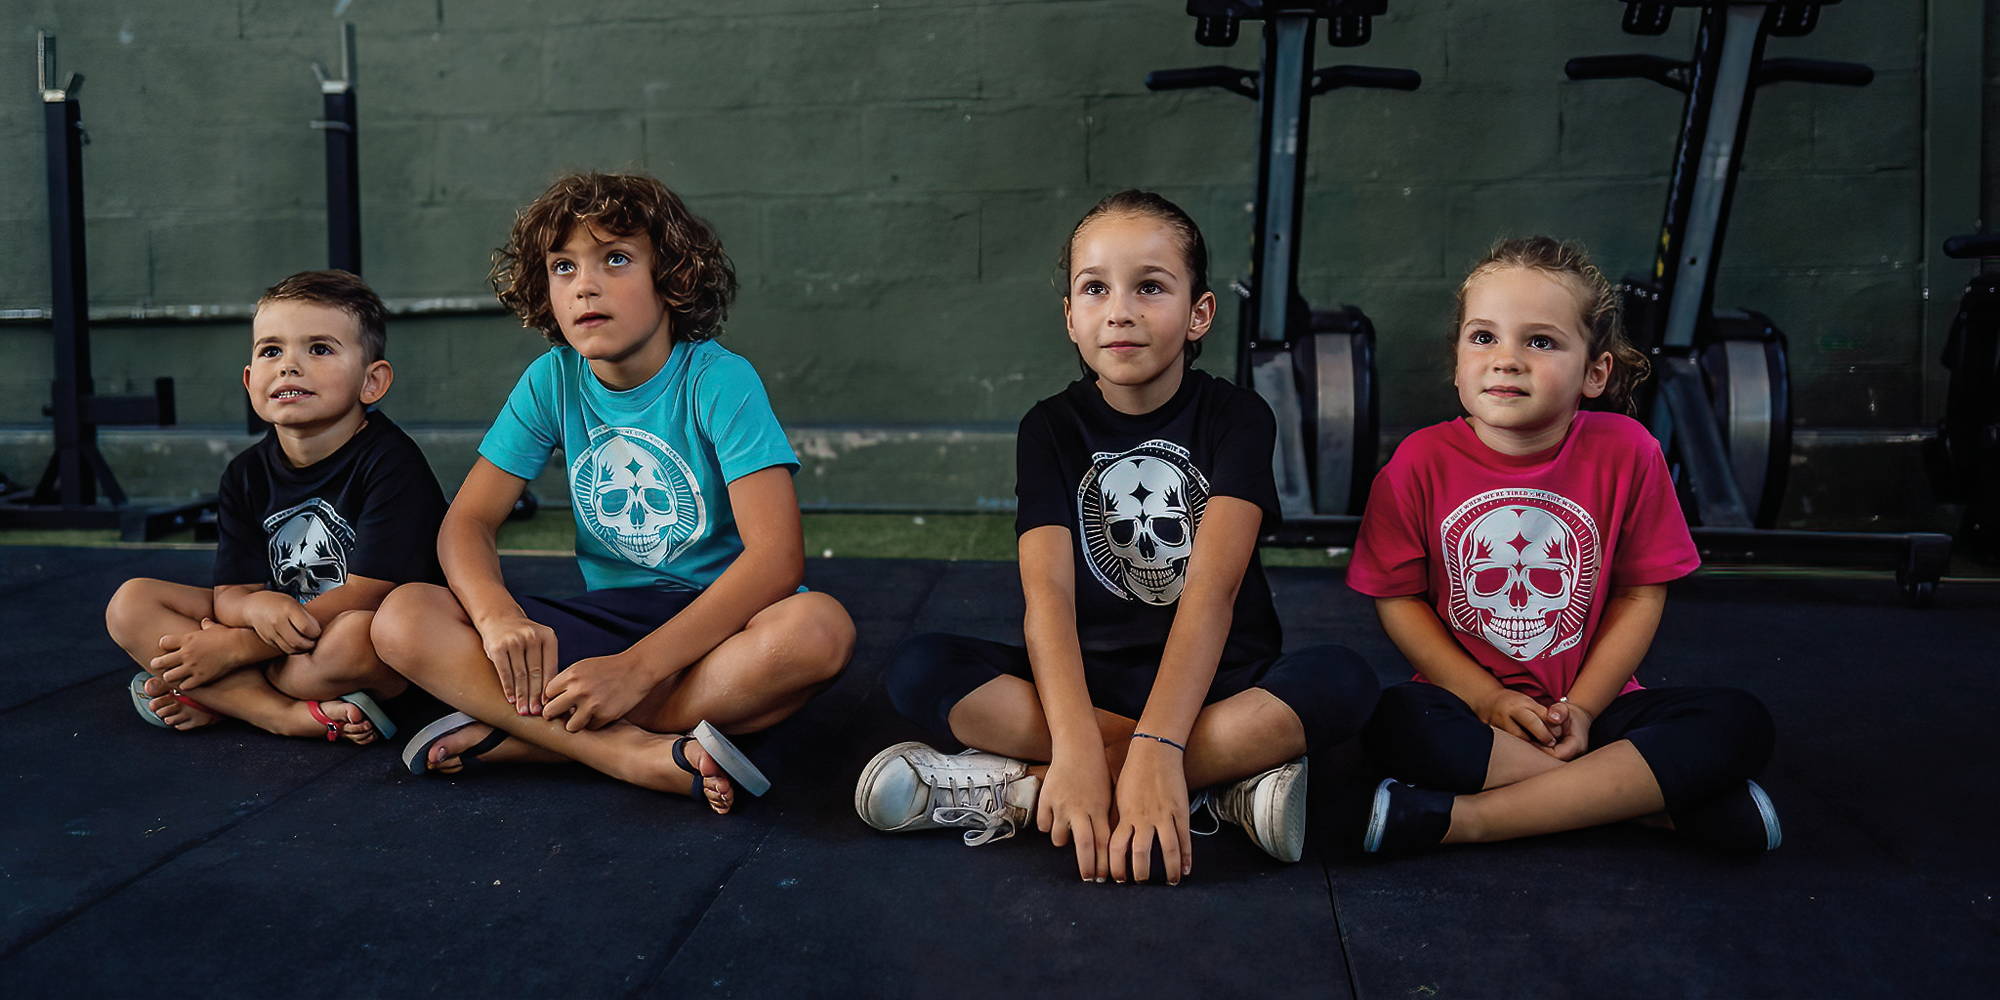 kids - babies - northern spirit - skull - crossfit kids - functional training & fitness clothing brand - new collection